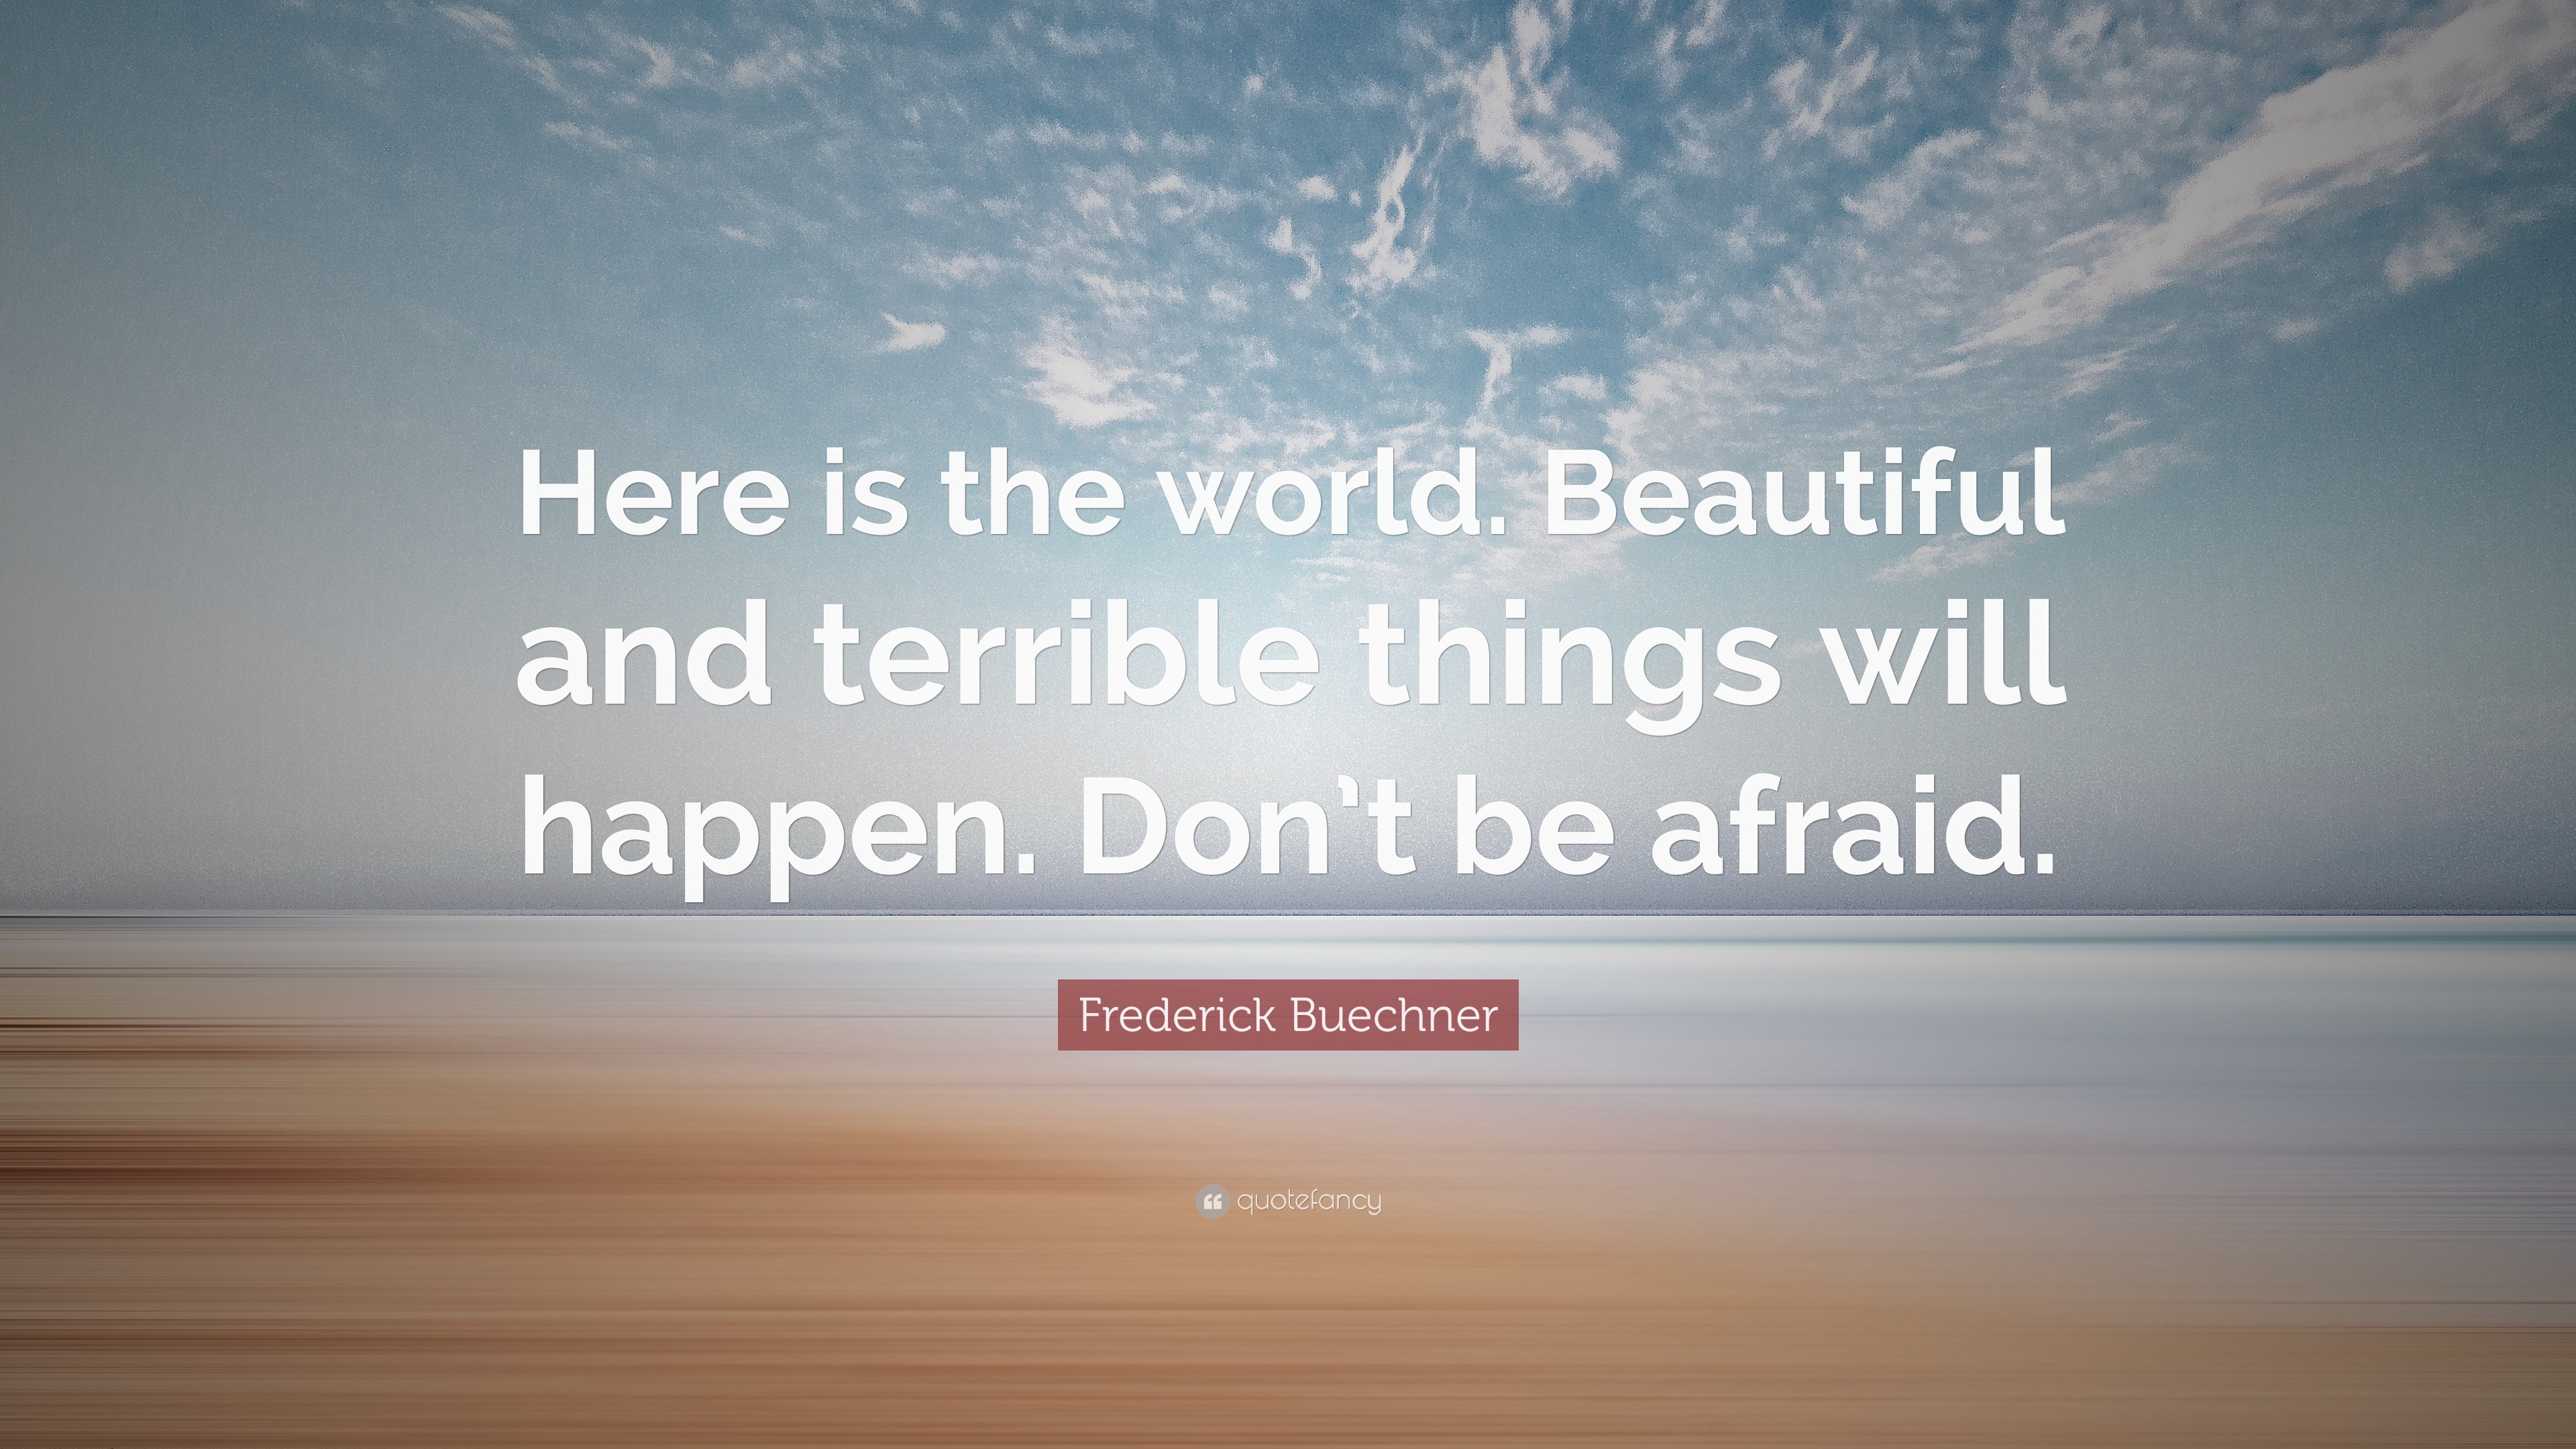 Frederick Buechner Quote: “Here is the world. Beautiful and terrible